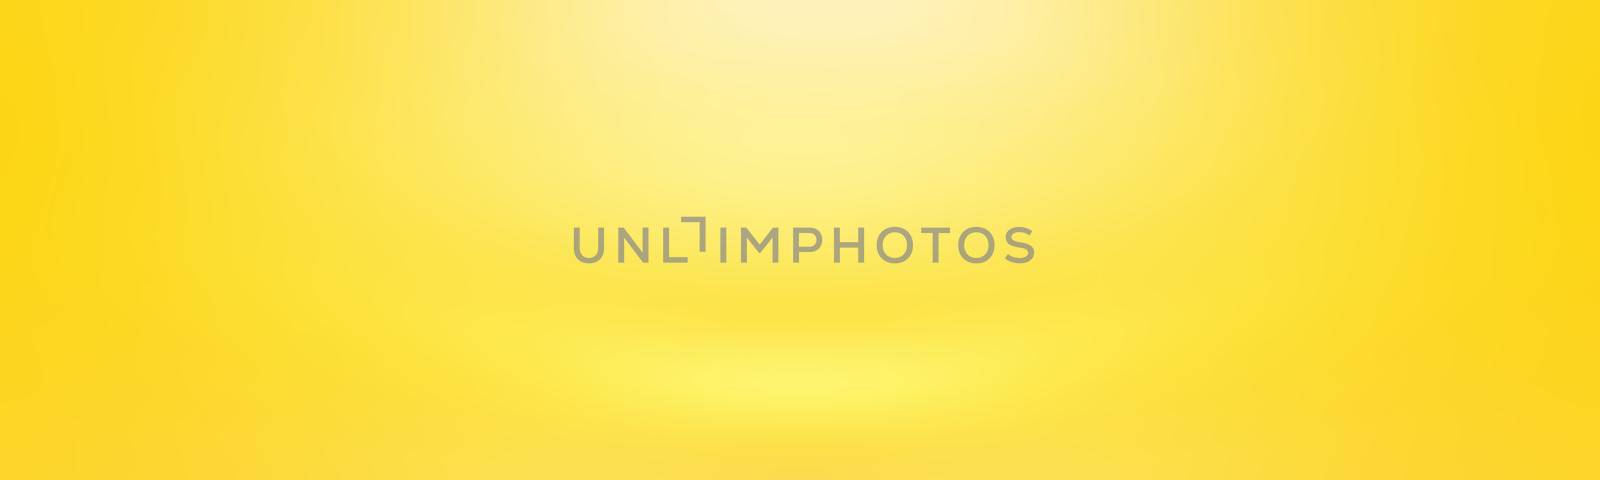 Abstract solid of shining yellow gradient studio wall room background